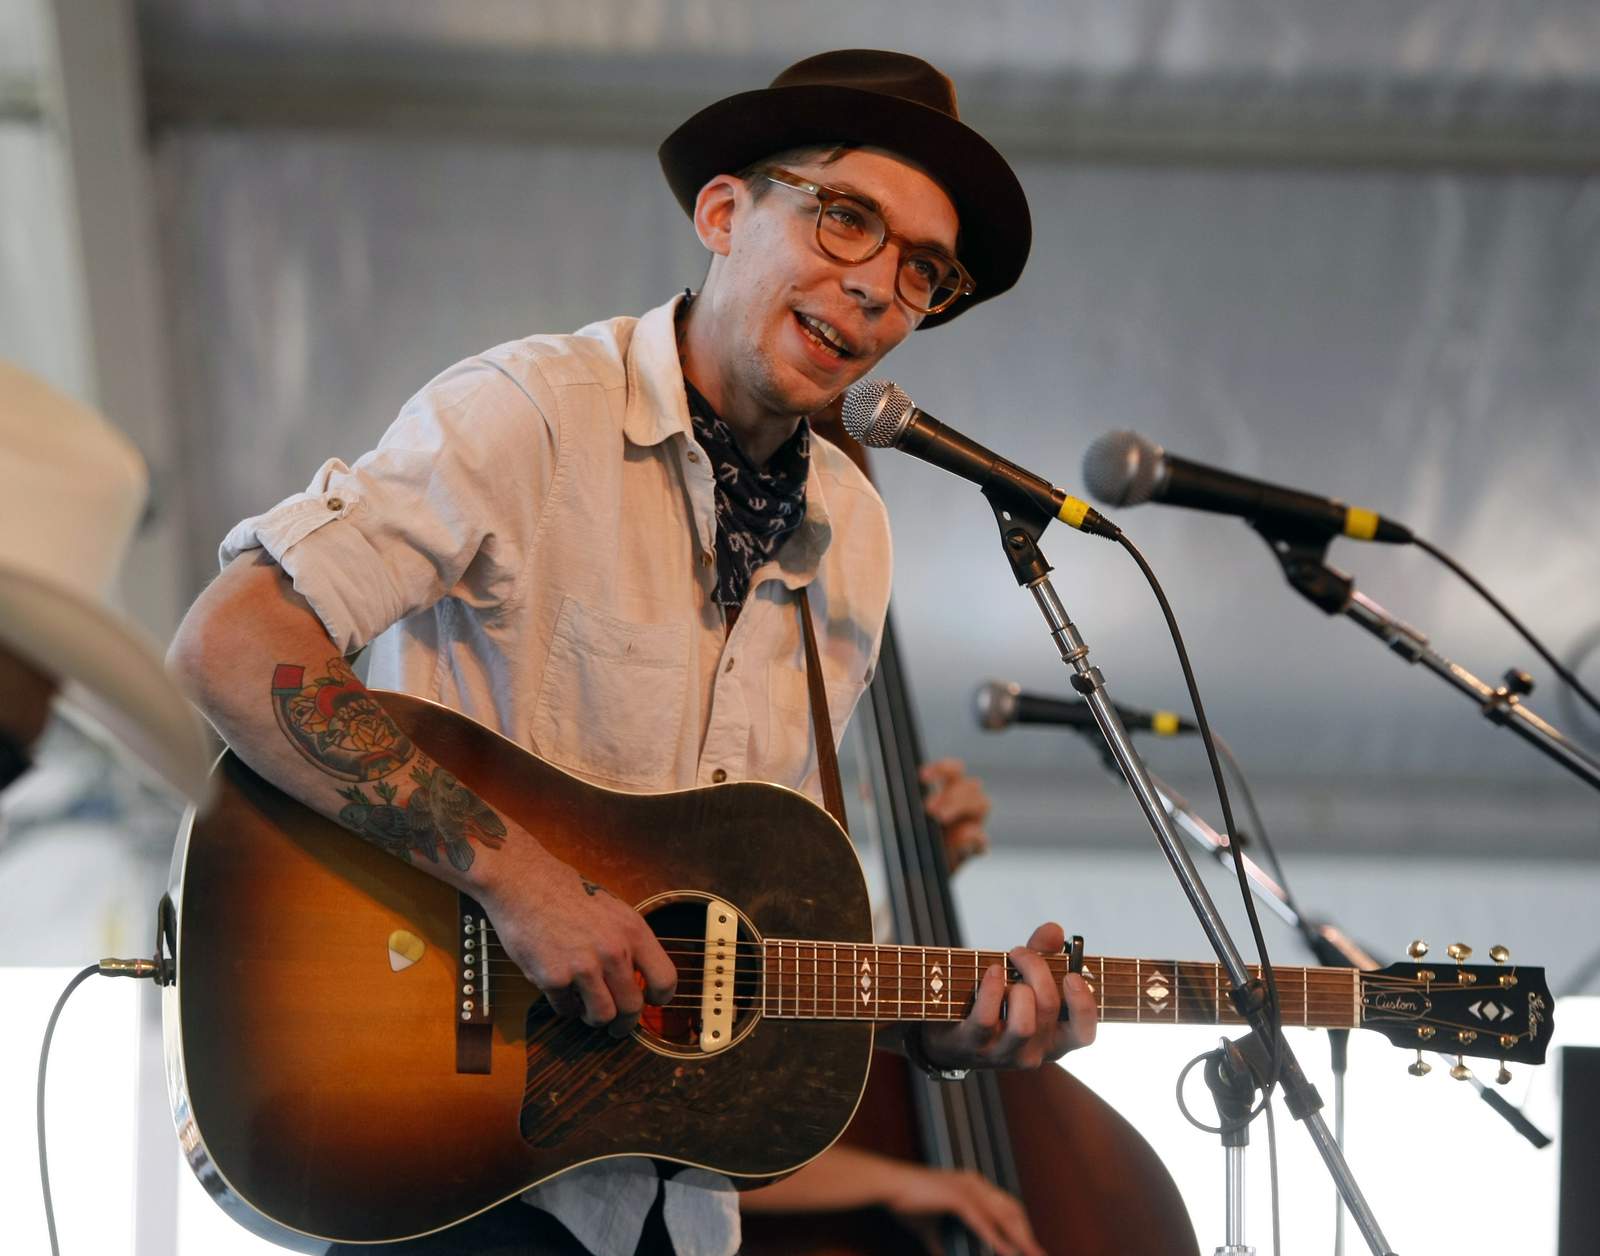 Musician Justin Townes Earle dead at age 38